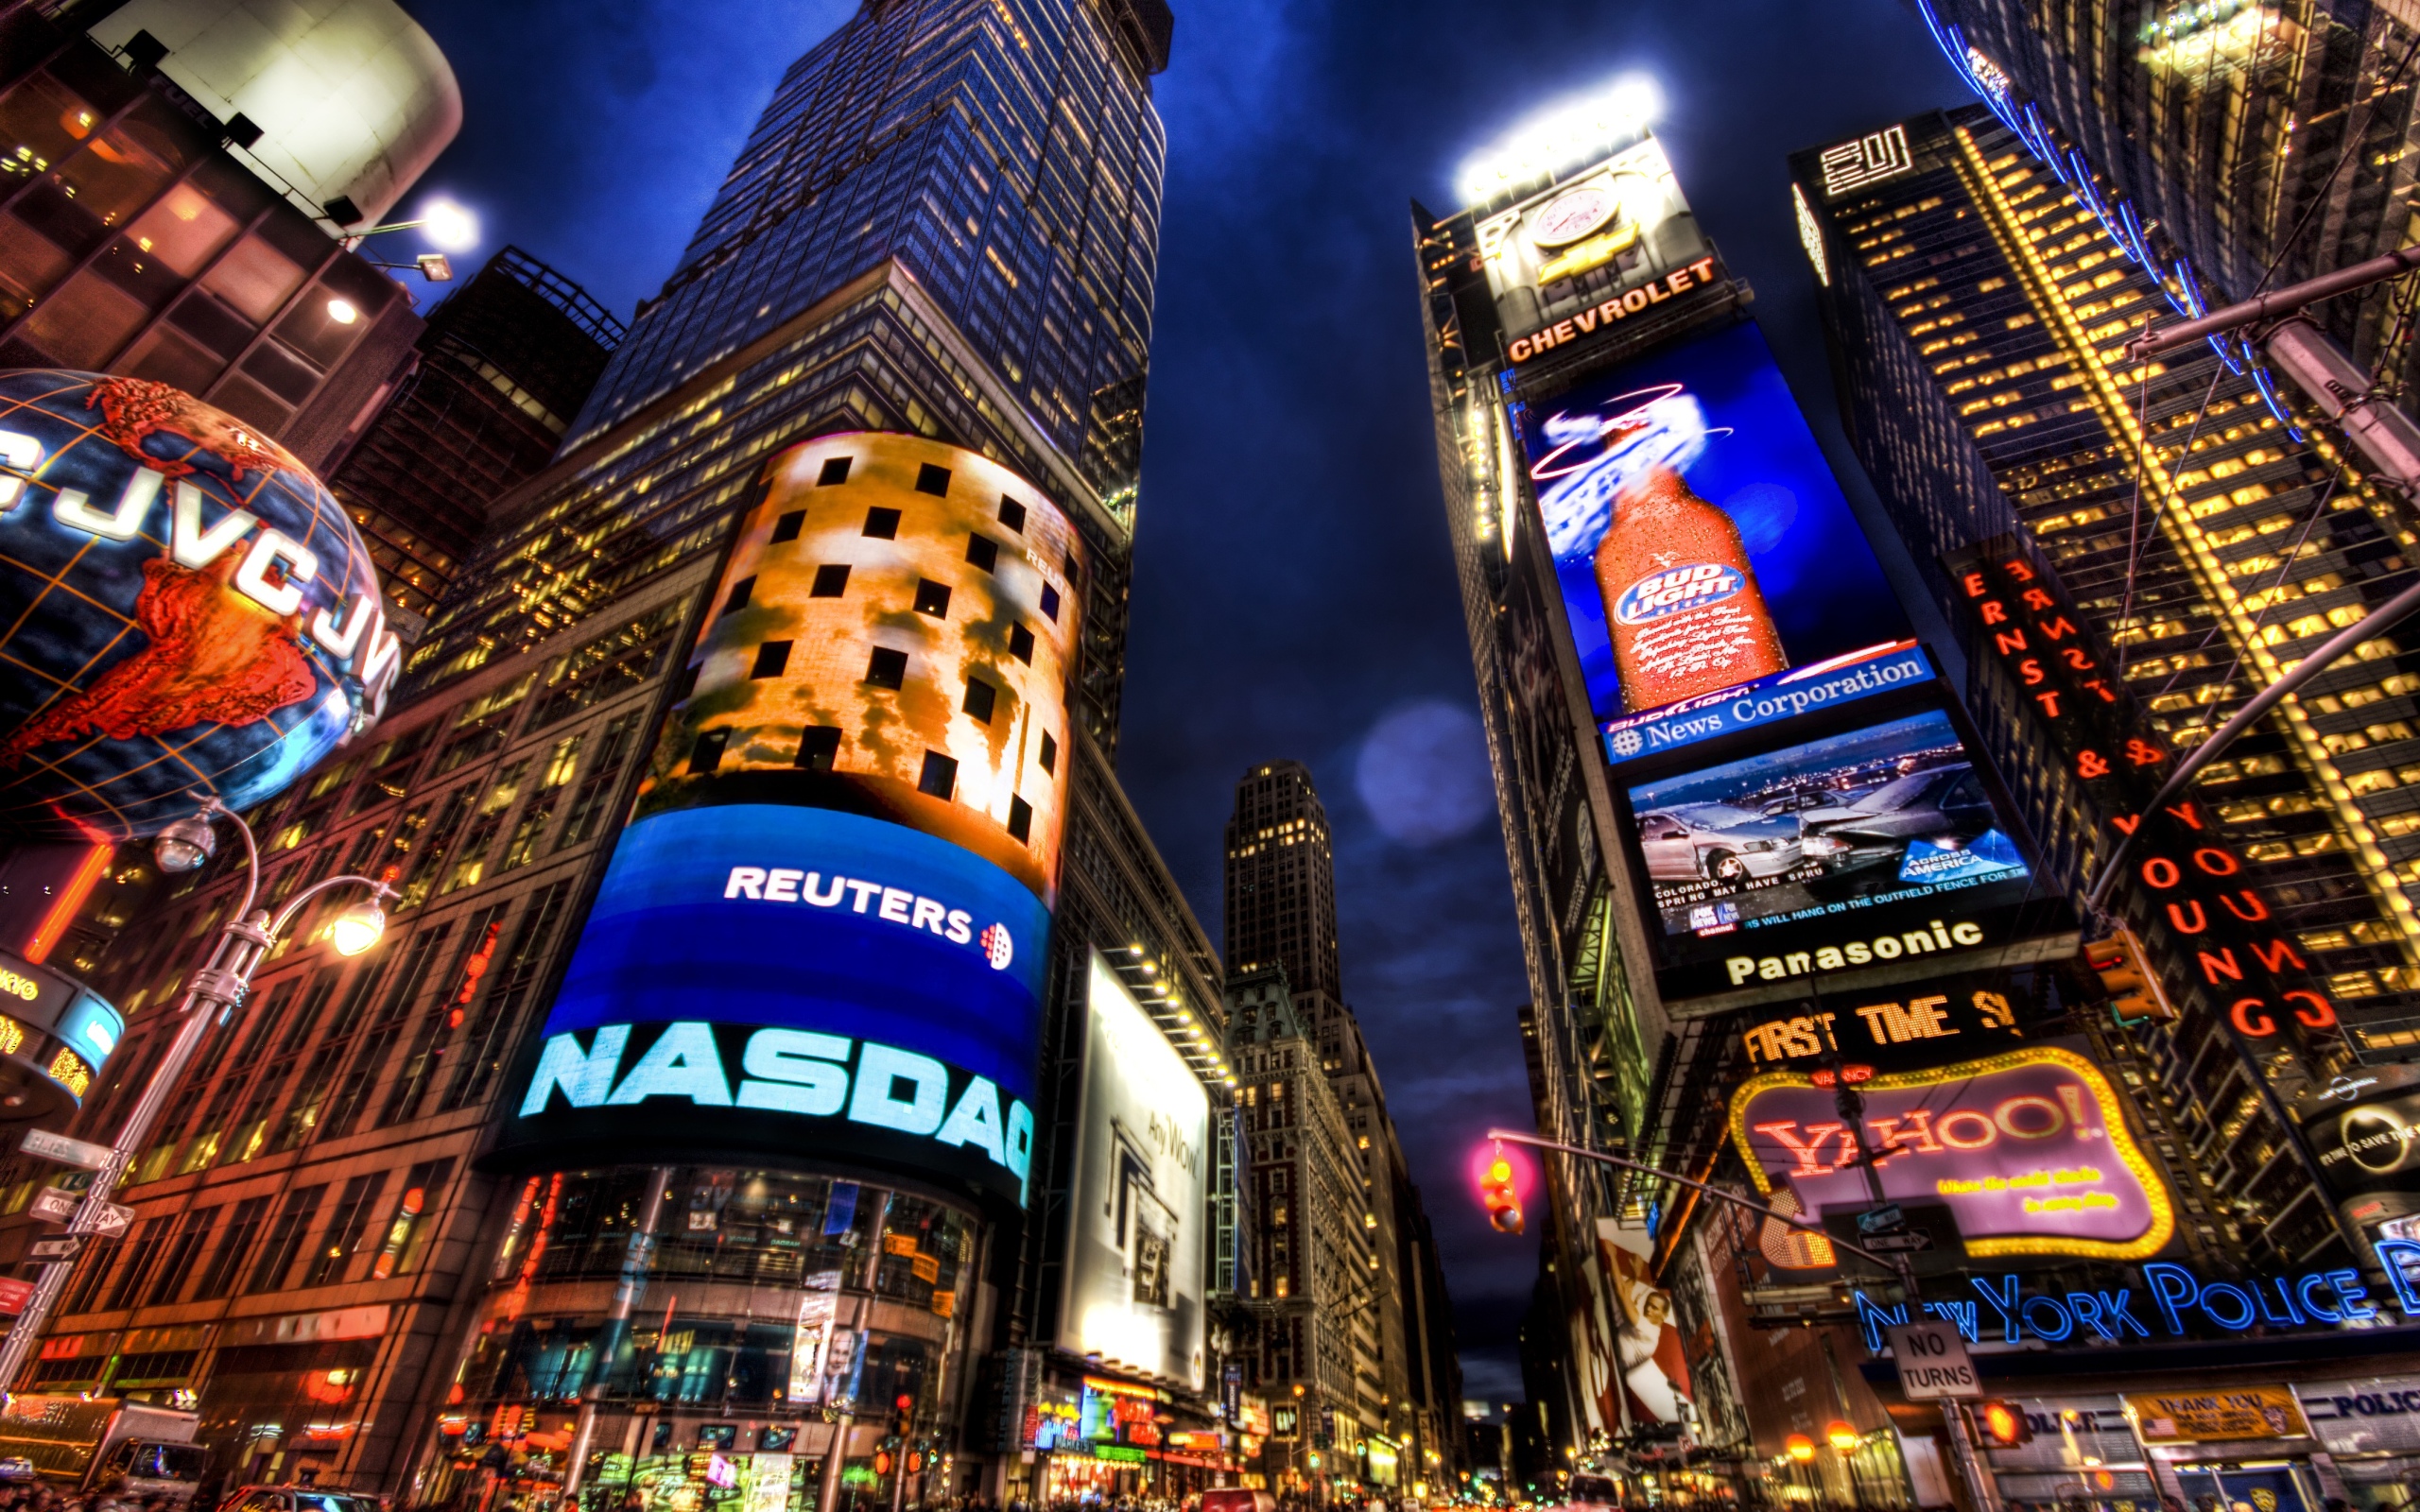 Great Times Square Wallpaper